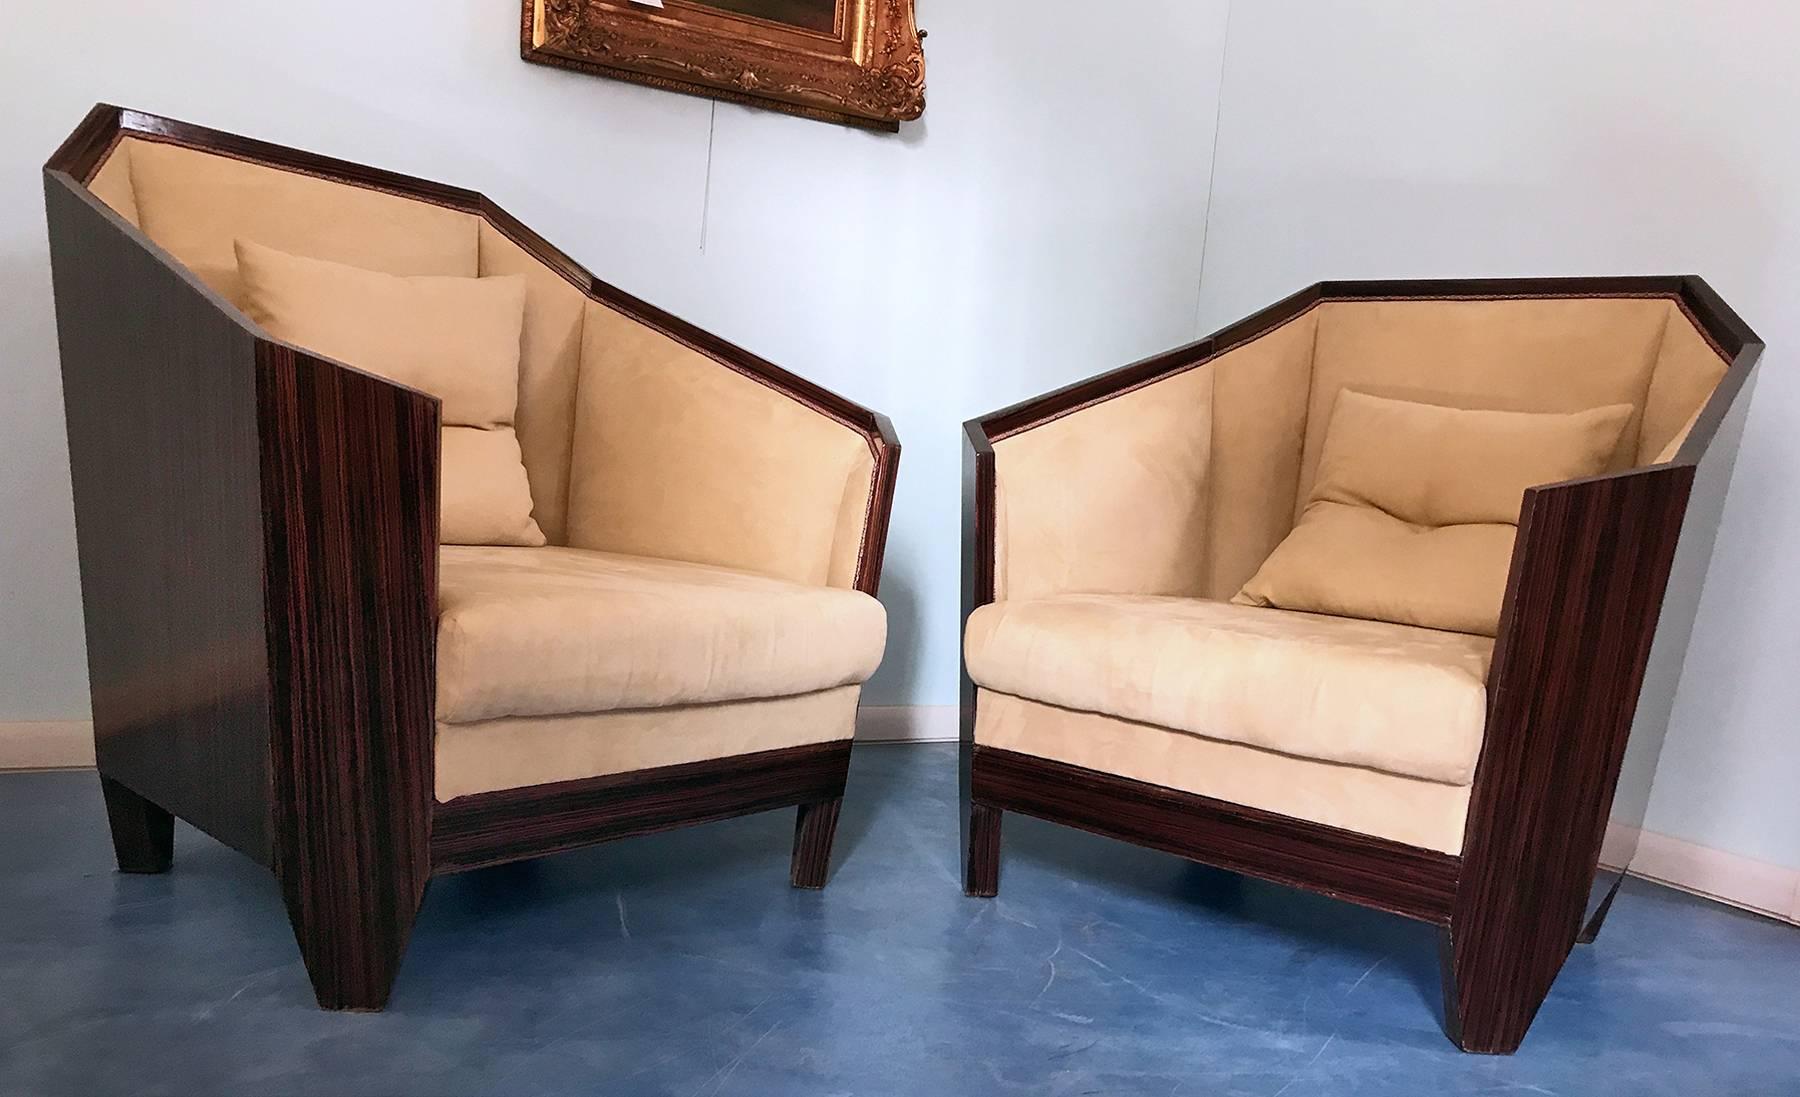 Monumental Art Deco armchairs in rosewood, with a unique line, completely restored with upholstery in artificial suede.